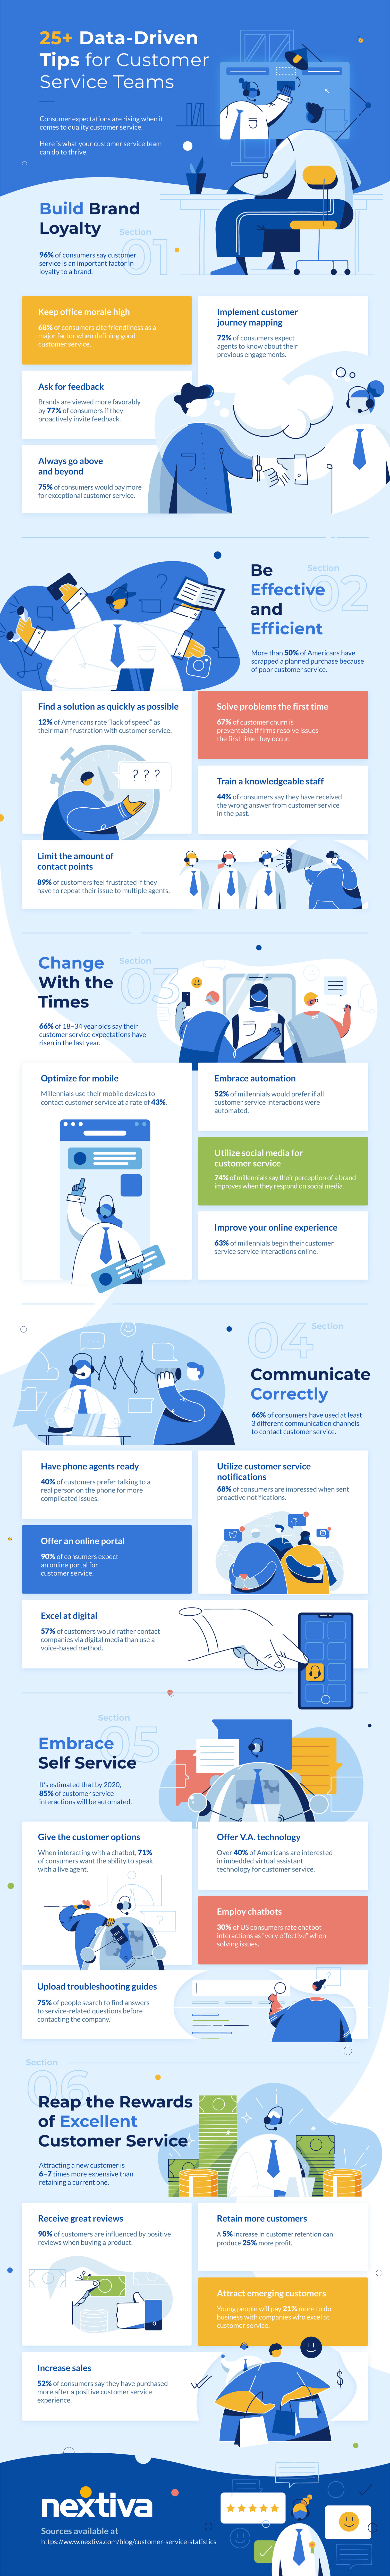 Customer service trends Infographic by Nextiva